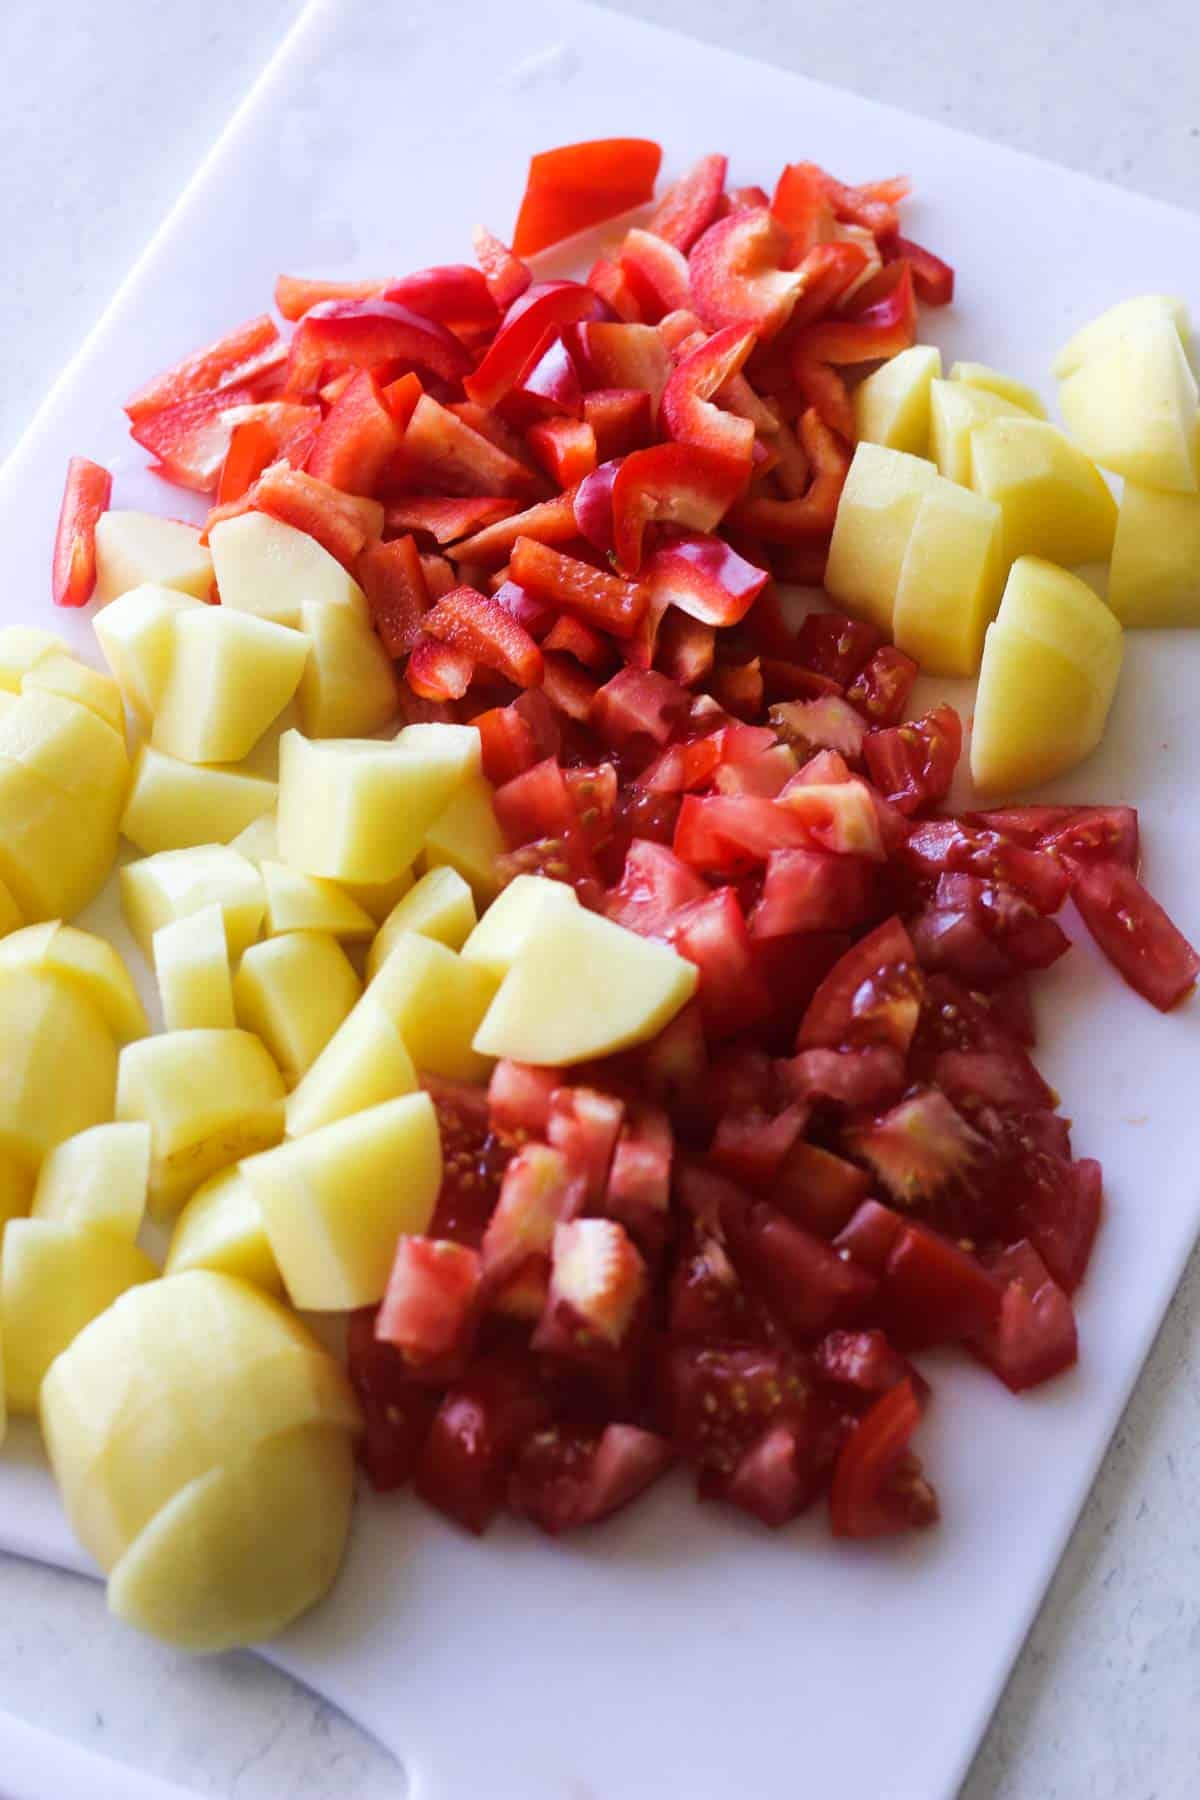 sliced bell peppers, tomatoes and cubed potatoes